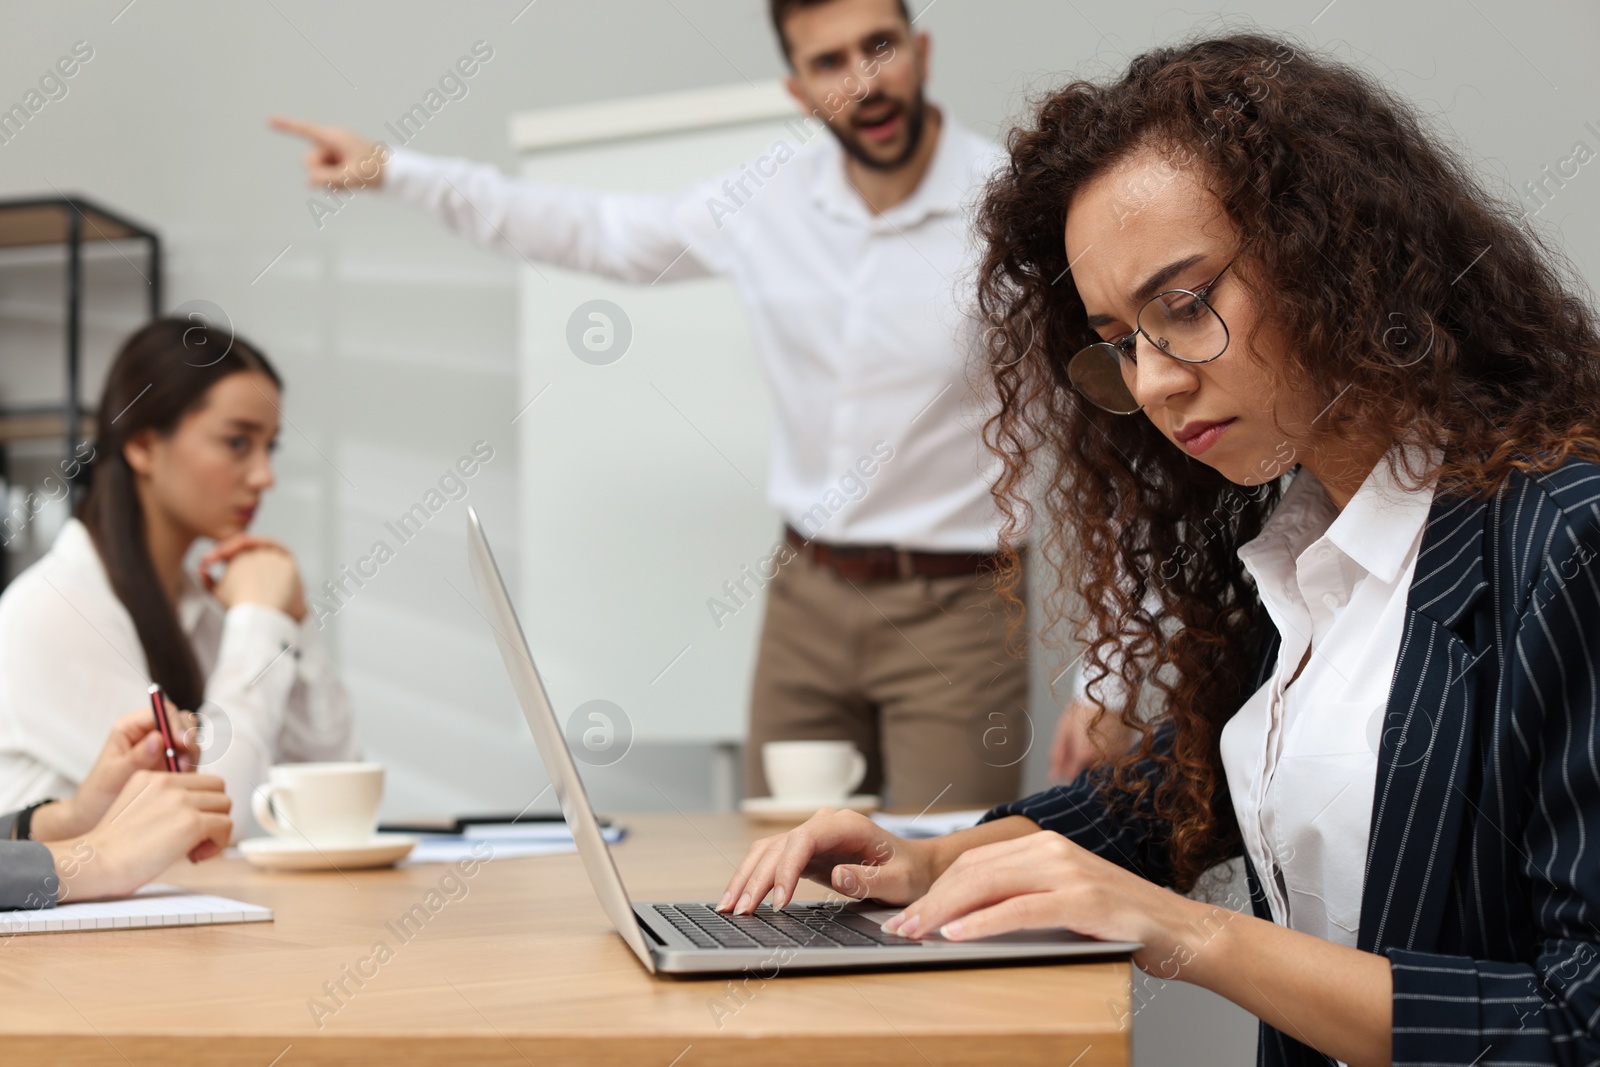 Photo of Man screaming at African American woman in office. Racism concept